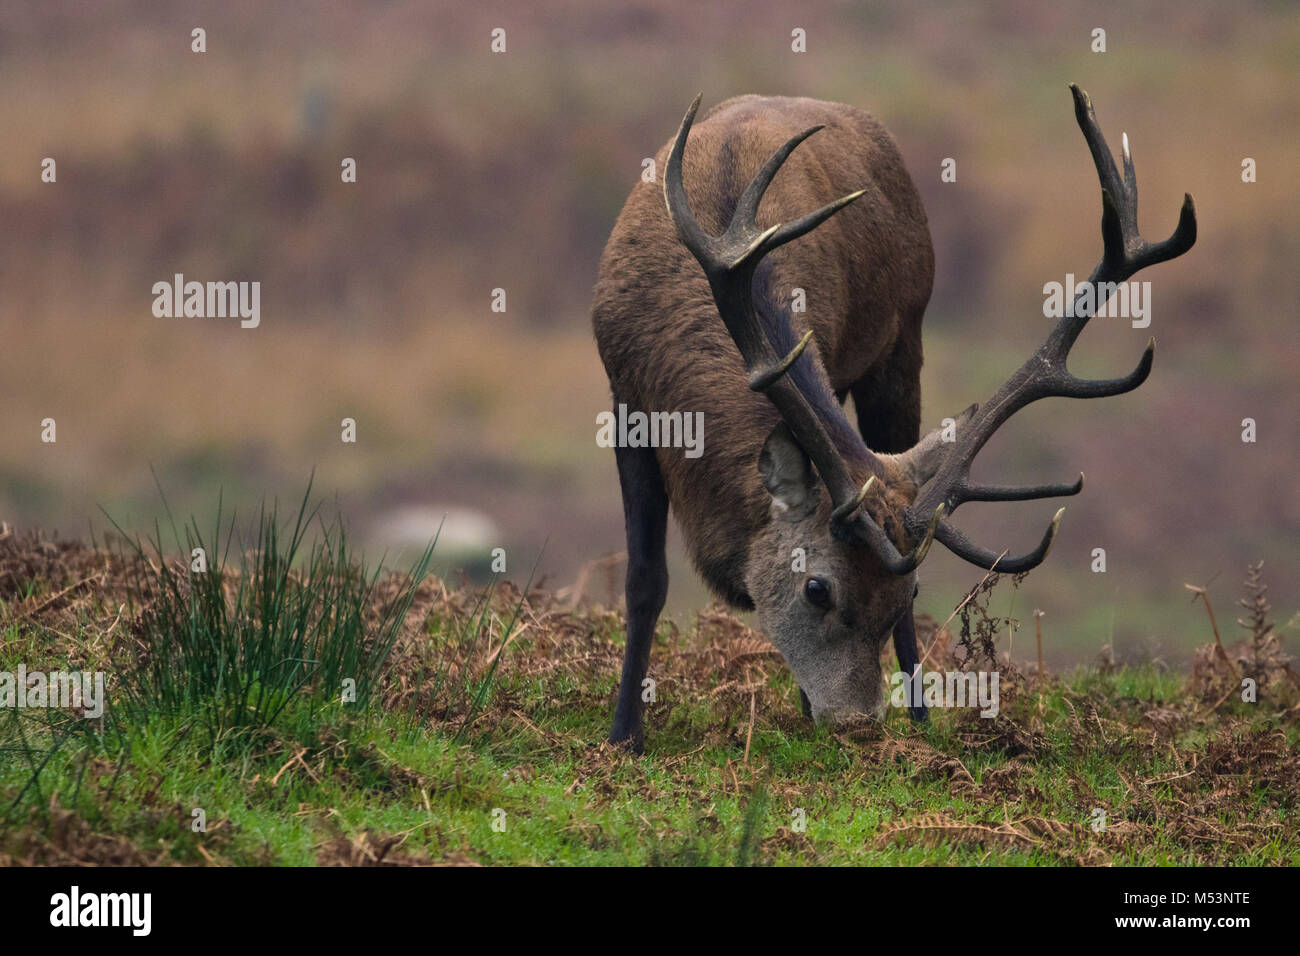 Red deer stag grazing on grass Stock Photo